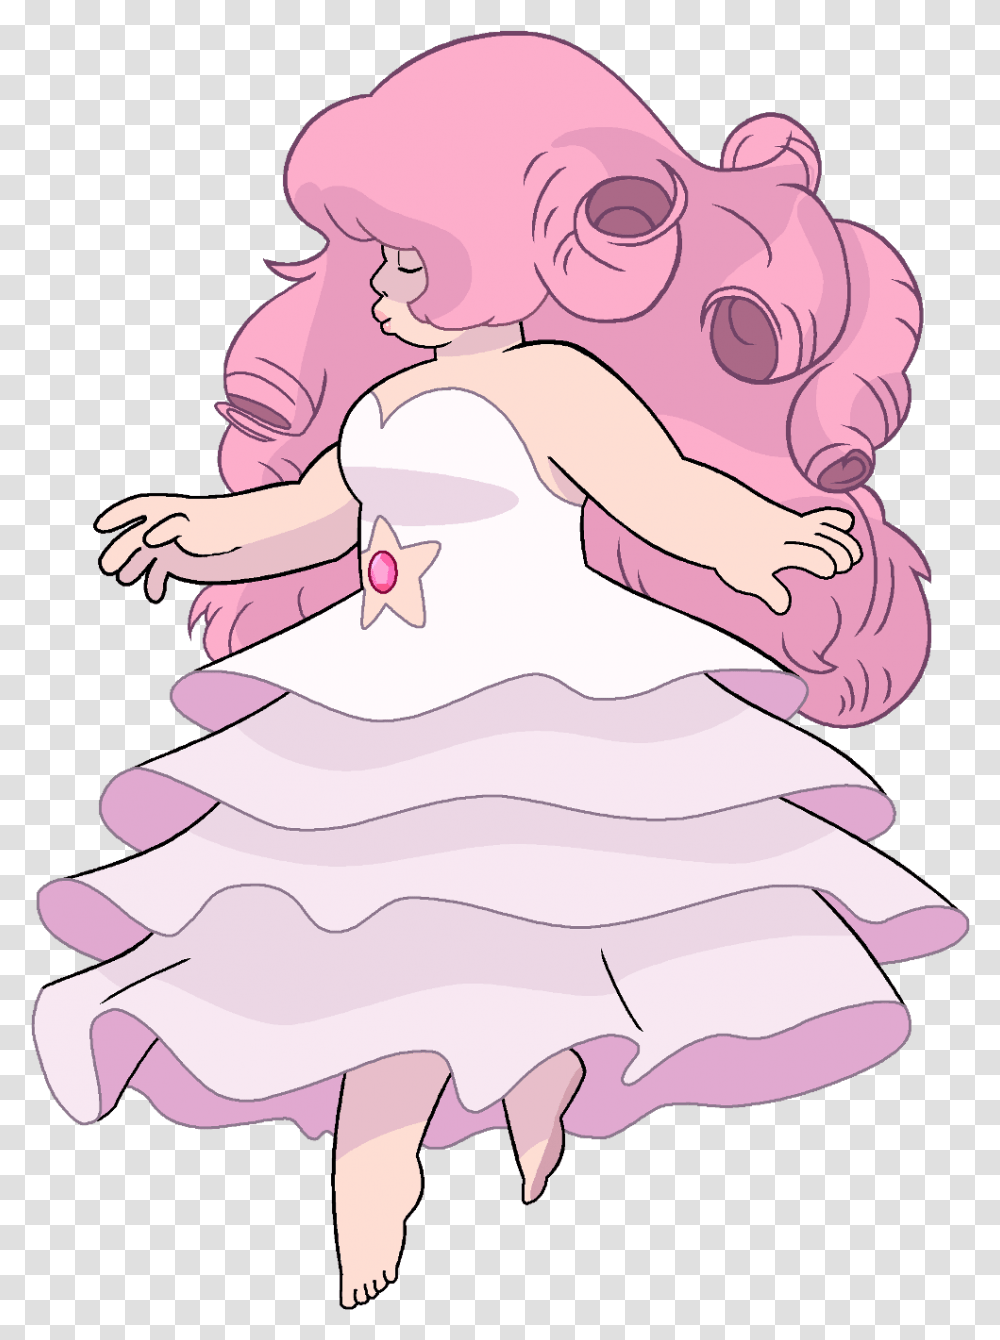 Got It From Google Images Its Not Hard To Find Steven Universe Rose Quartz, Female, Baby, Newborn Transparent Png